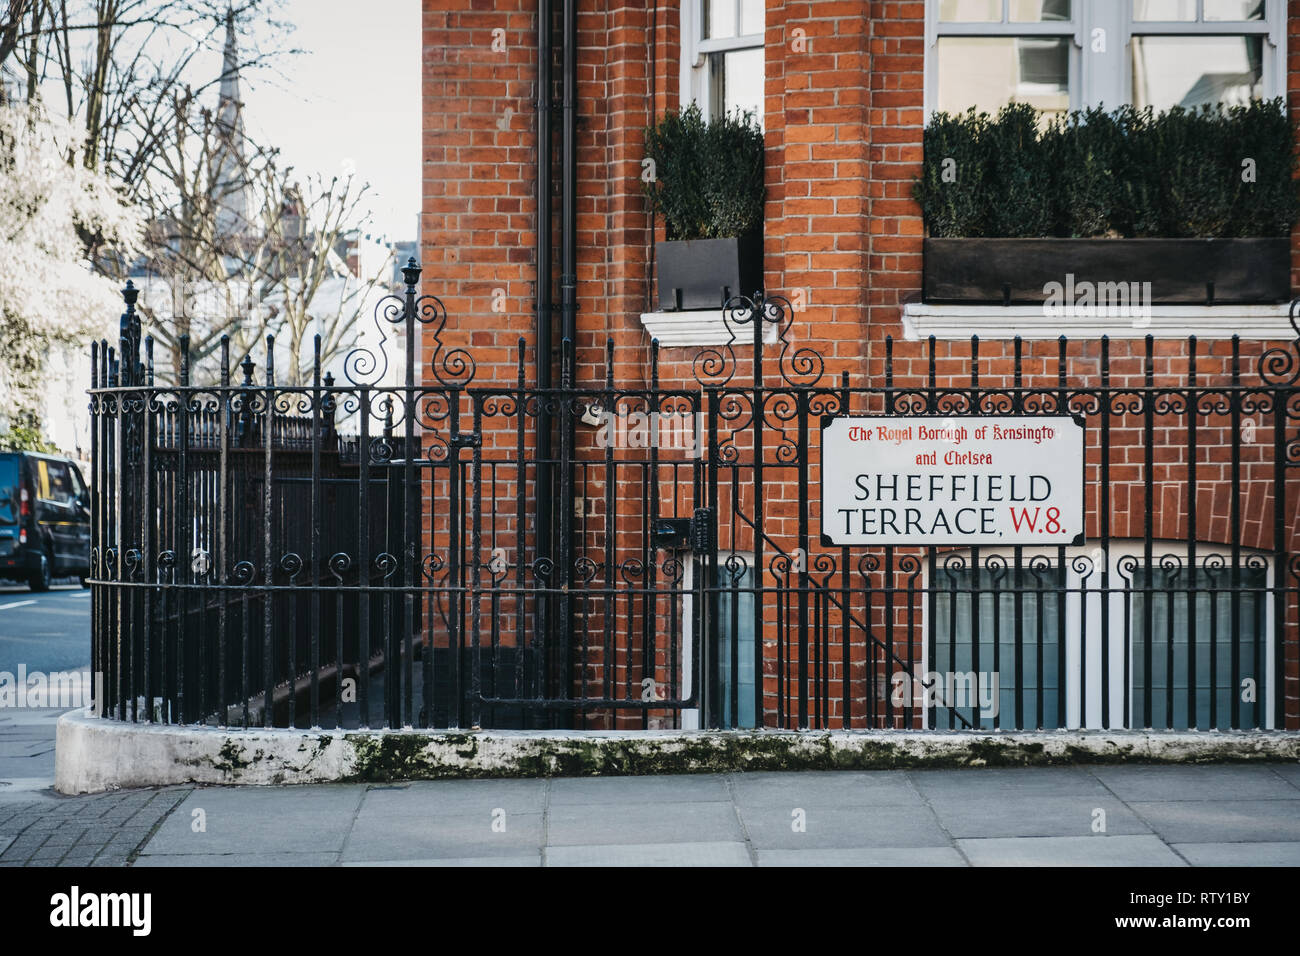 London, UK - February 23, 2019: Sheffield Terrace street name sign on a black fence in The Royal Borough of Kensington and Chelsea, an affluent area i Stock Photo